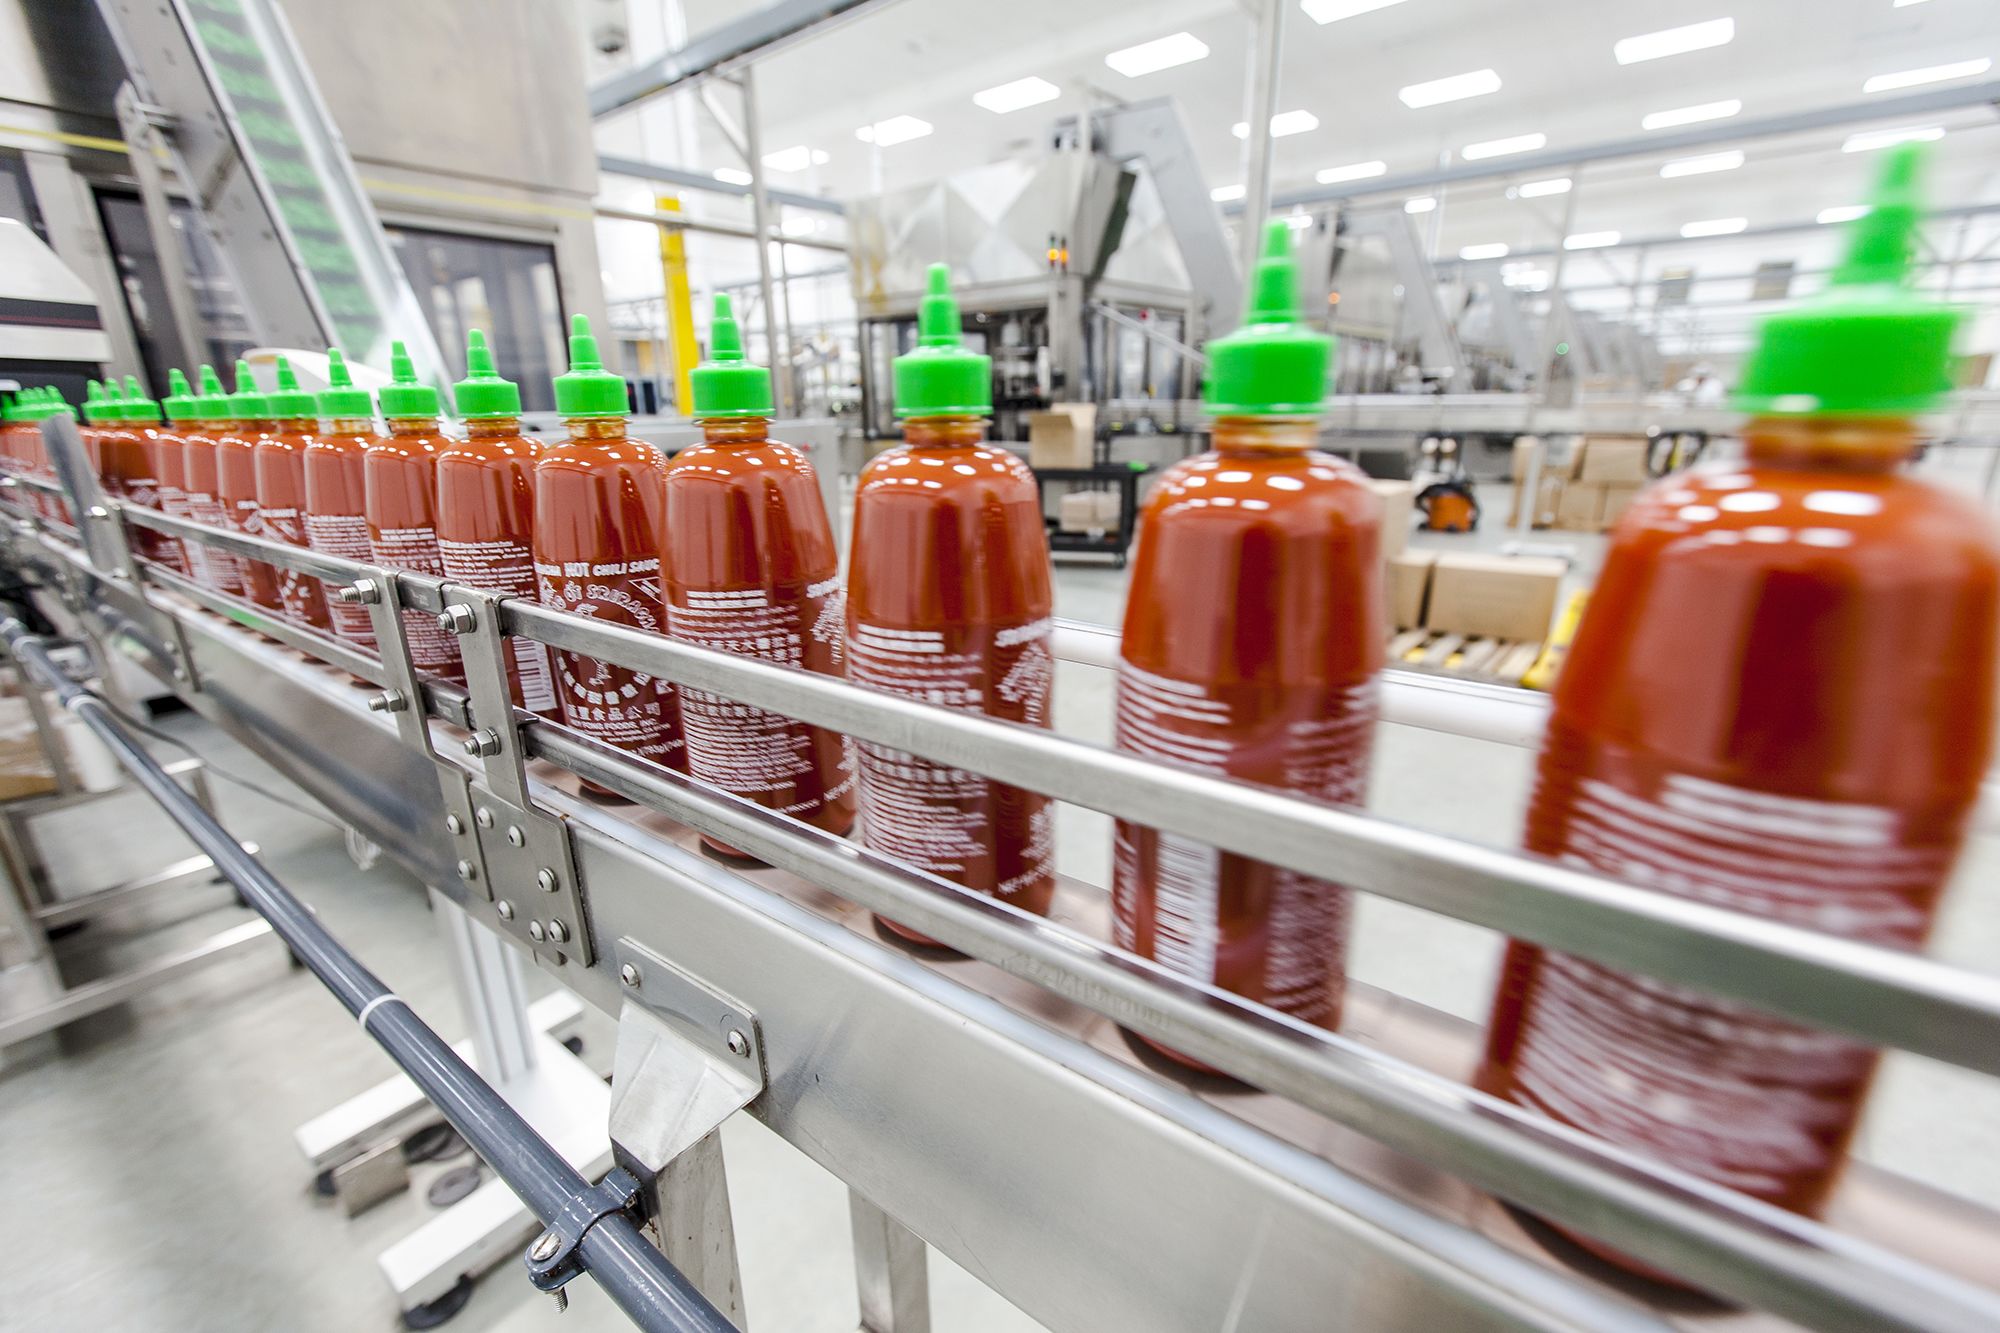 Why can't I find Sriracha hot sauce at the supermarket? - AS USA